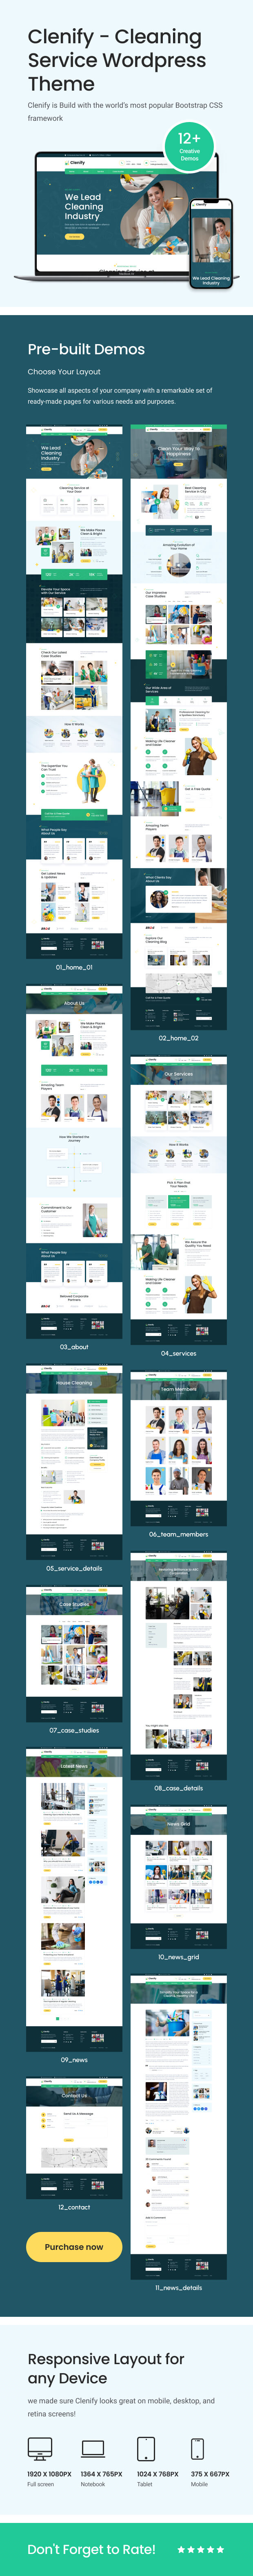 Clenify – Cleaning Service WordPress Theme - 4